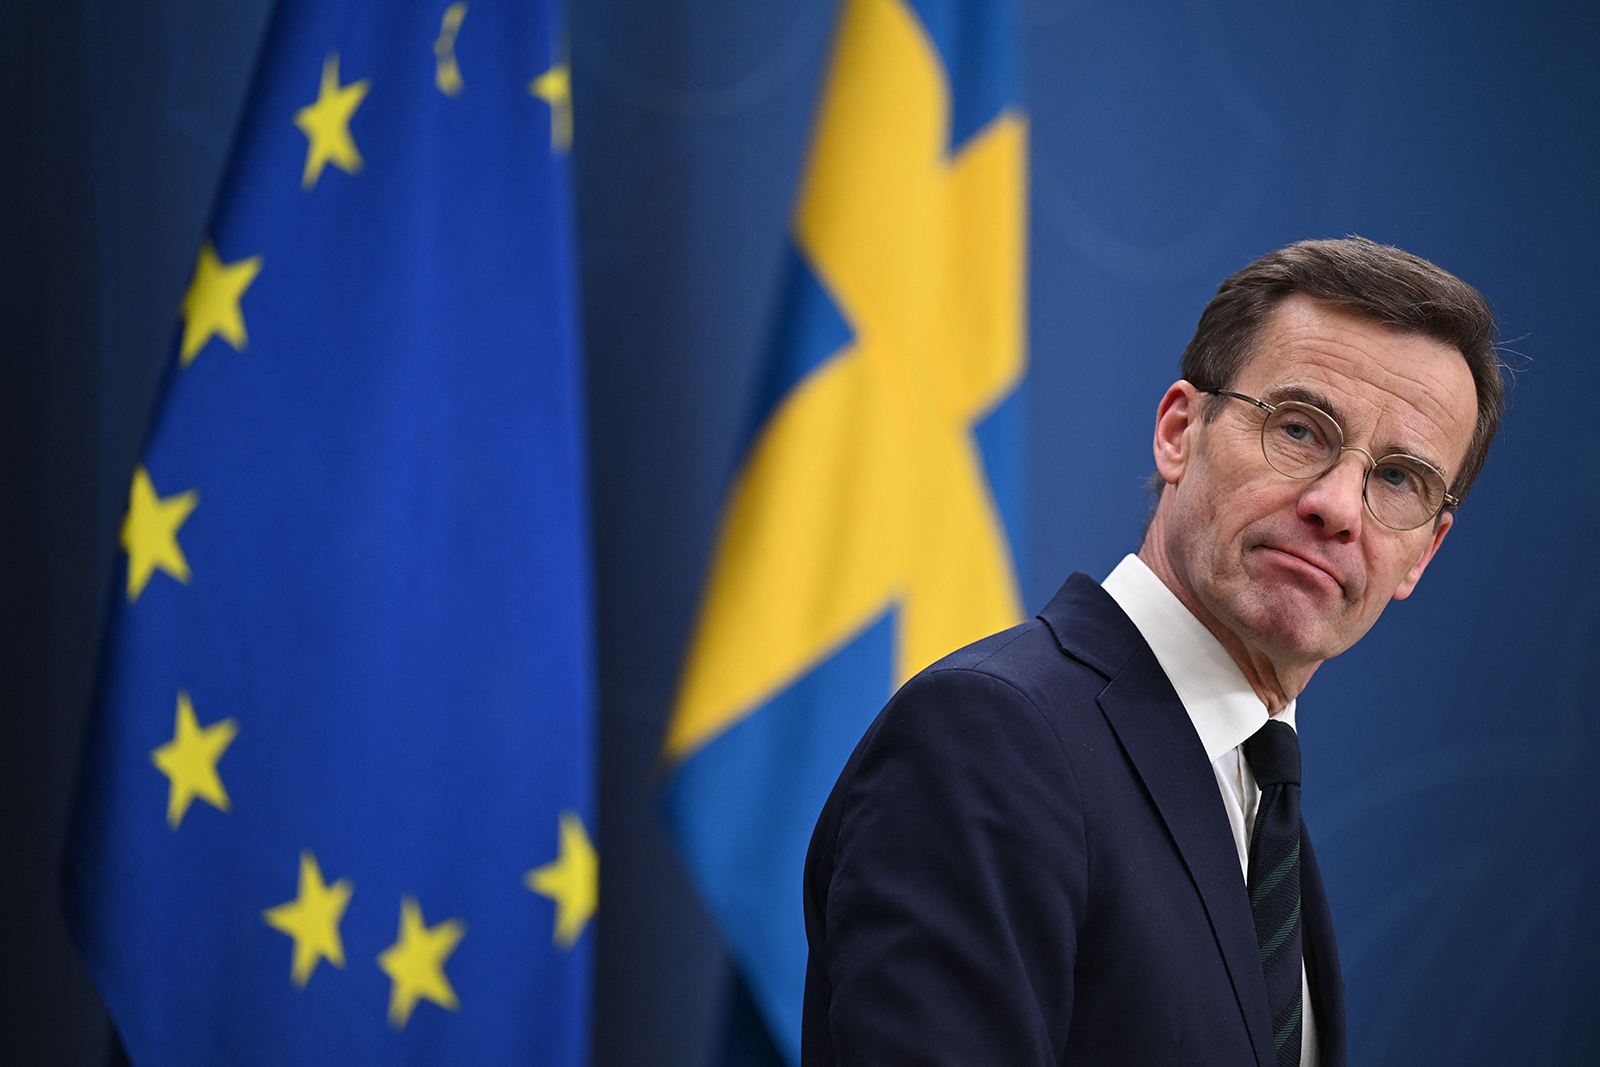 Ulf Kristersson attends a press conference in Stockholm, Sweden, on February 26.